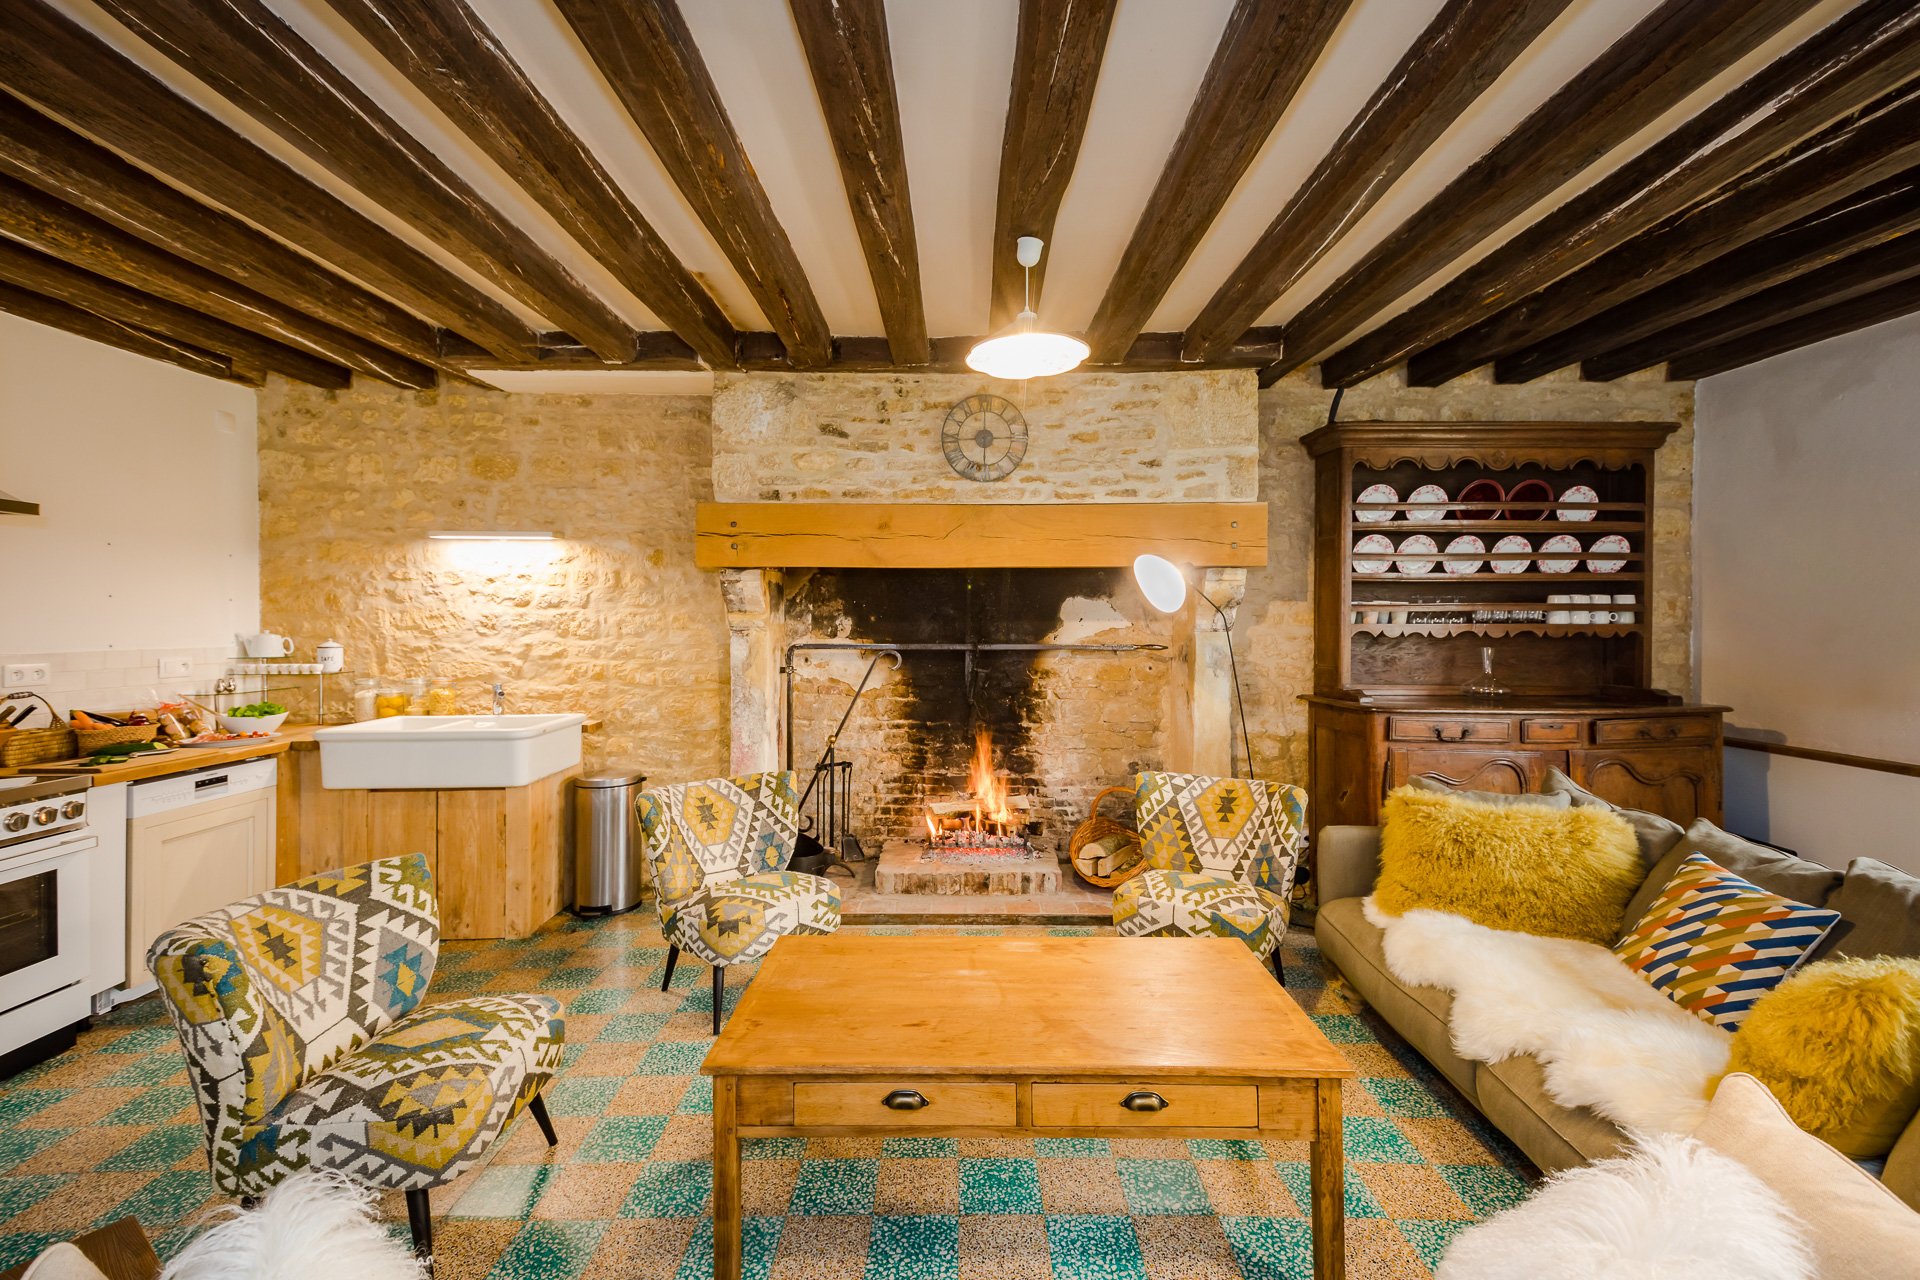 A living room with a fireplace and chairs in the Farmhouse, a cosy french cottage available for rent at Chateau de Courtomer.